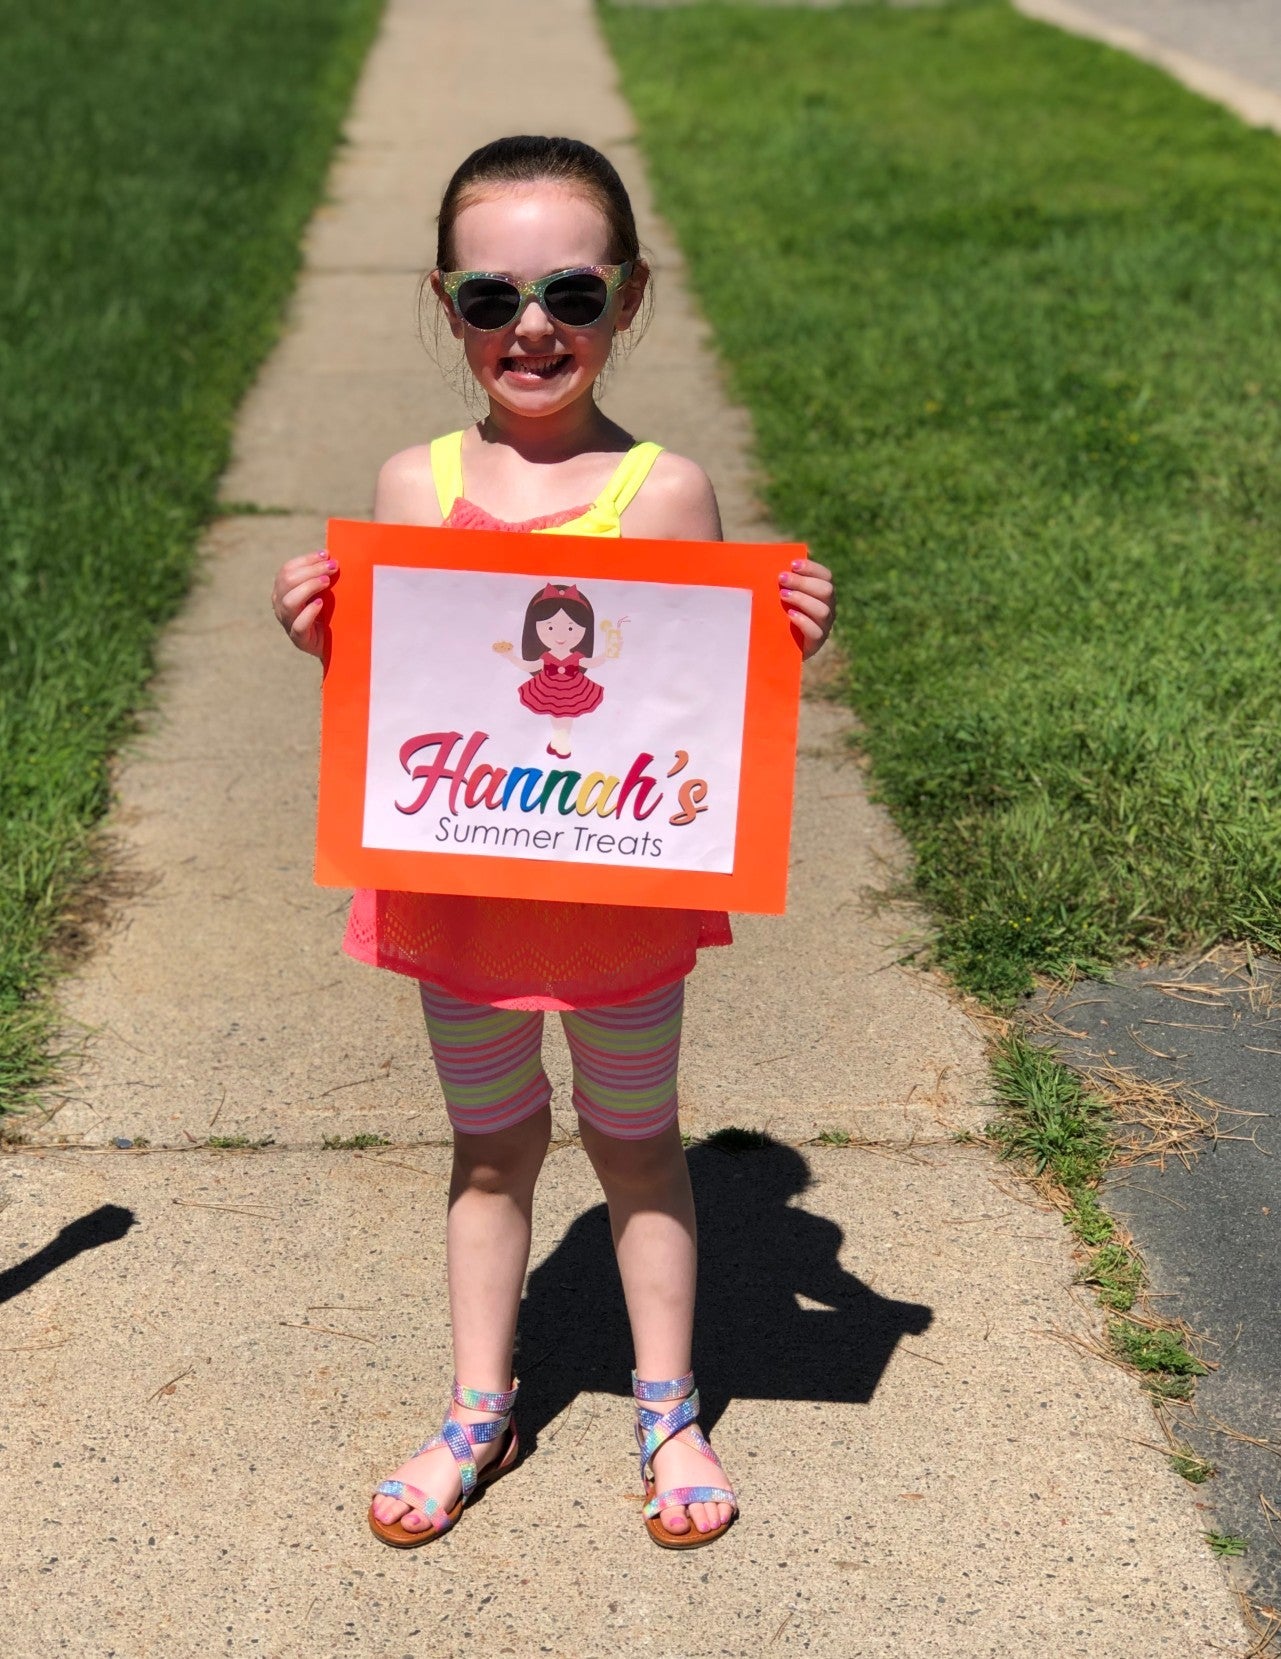 Hannah stands on the sidewalk holding a promotional sign for Hannah's Treats.